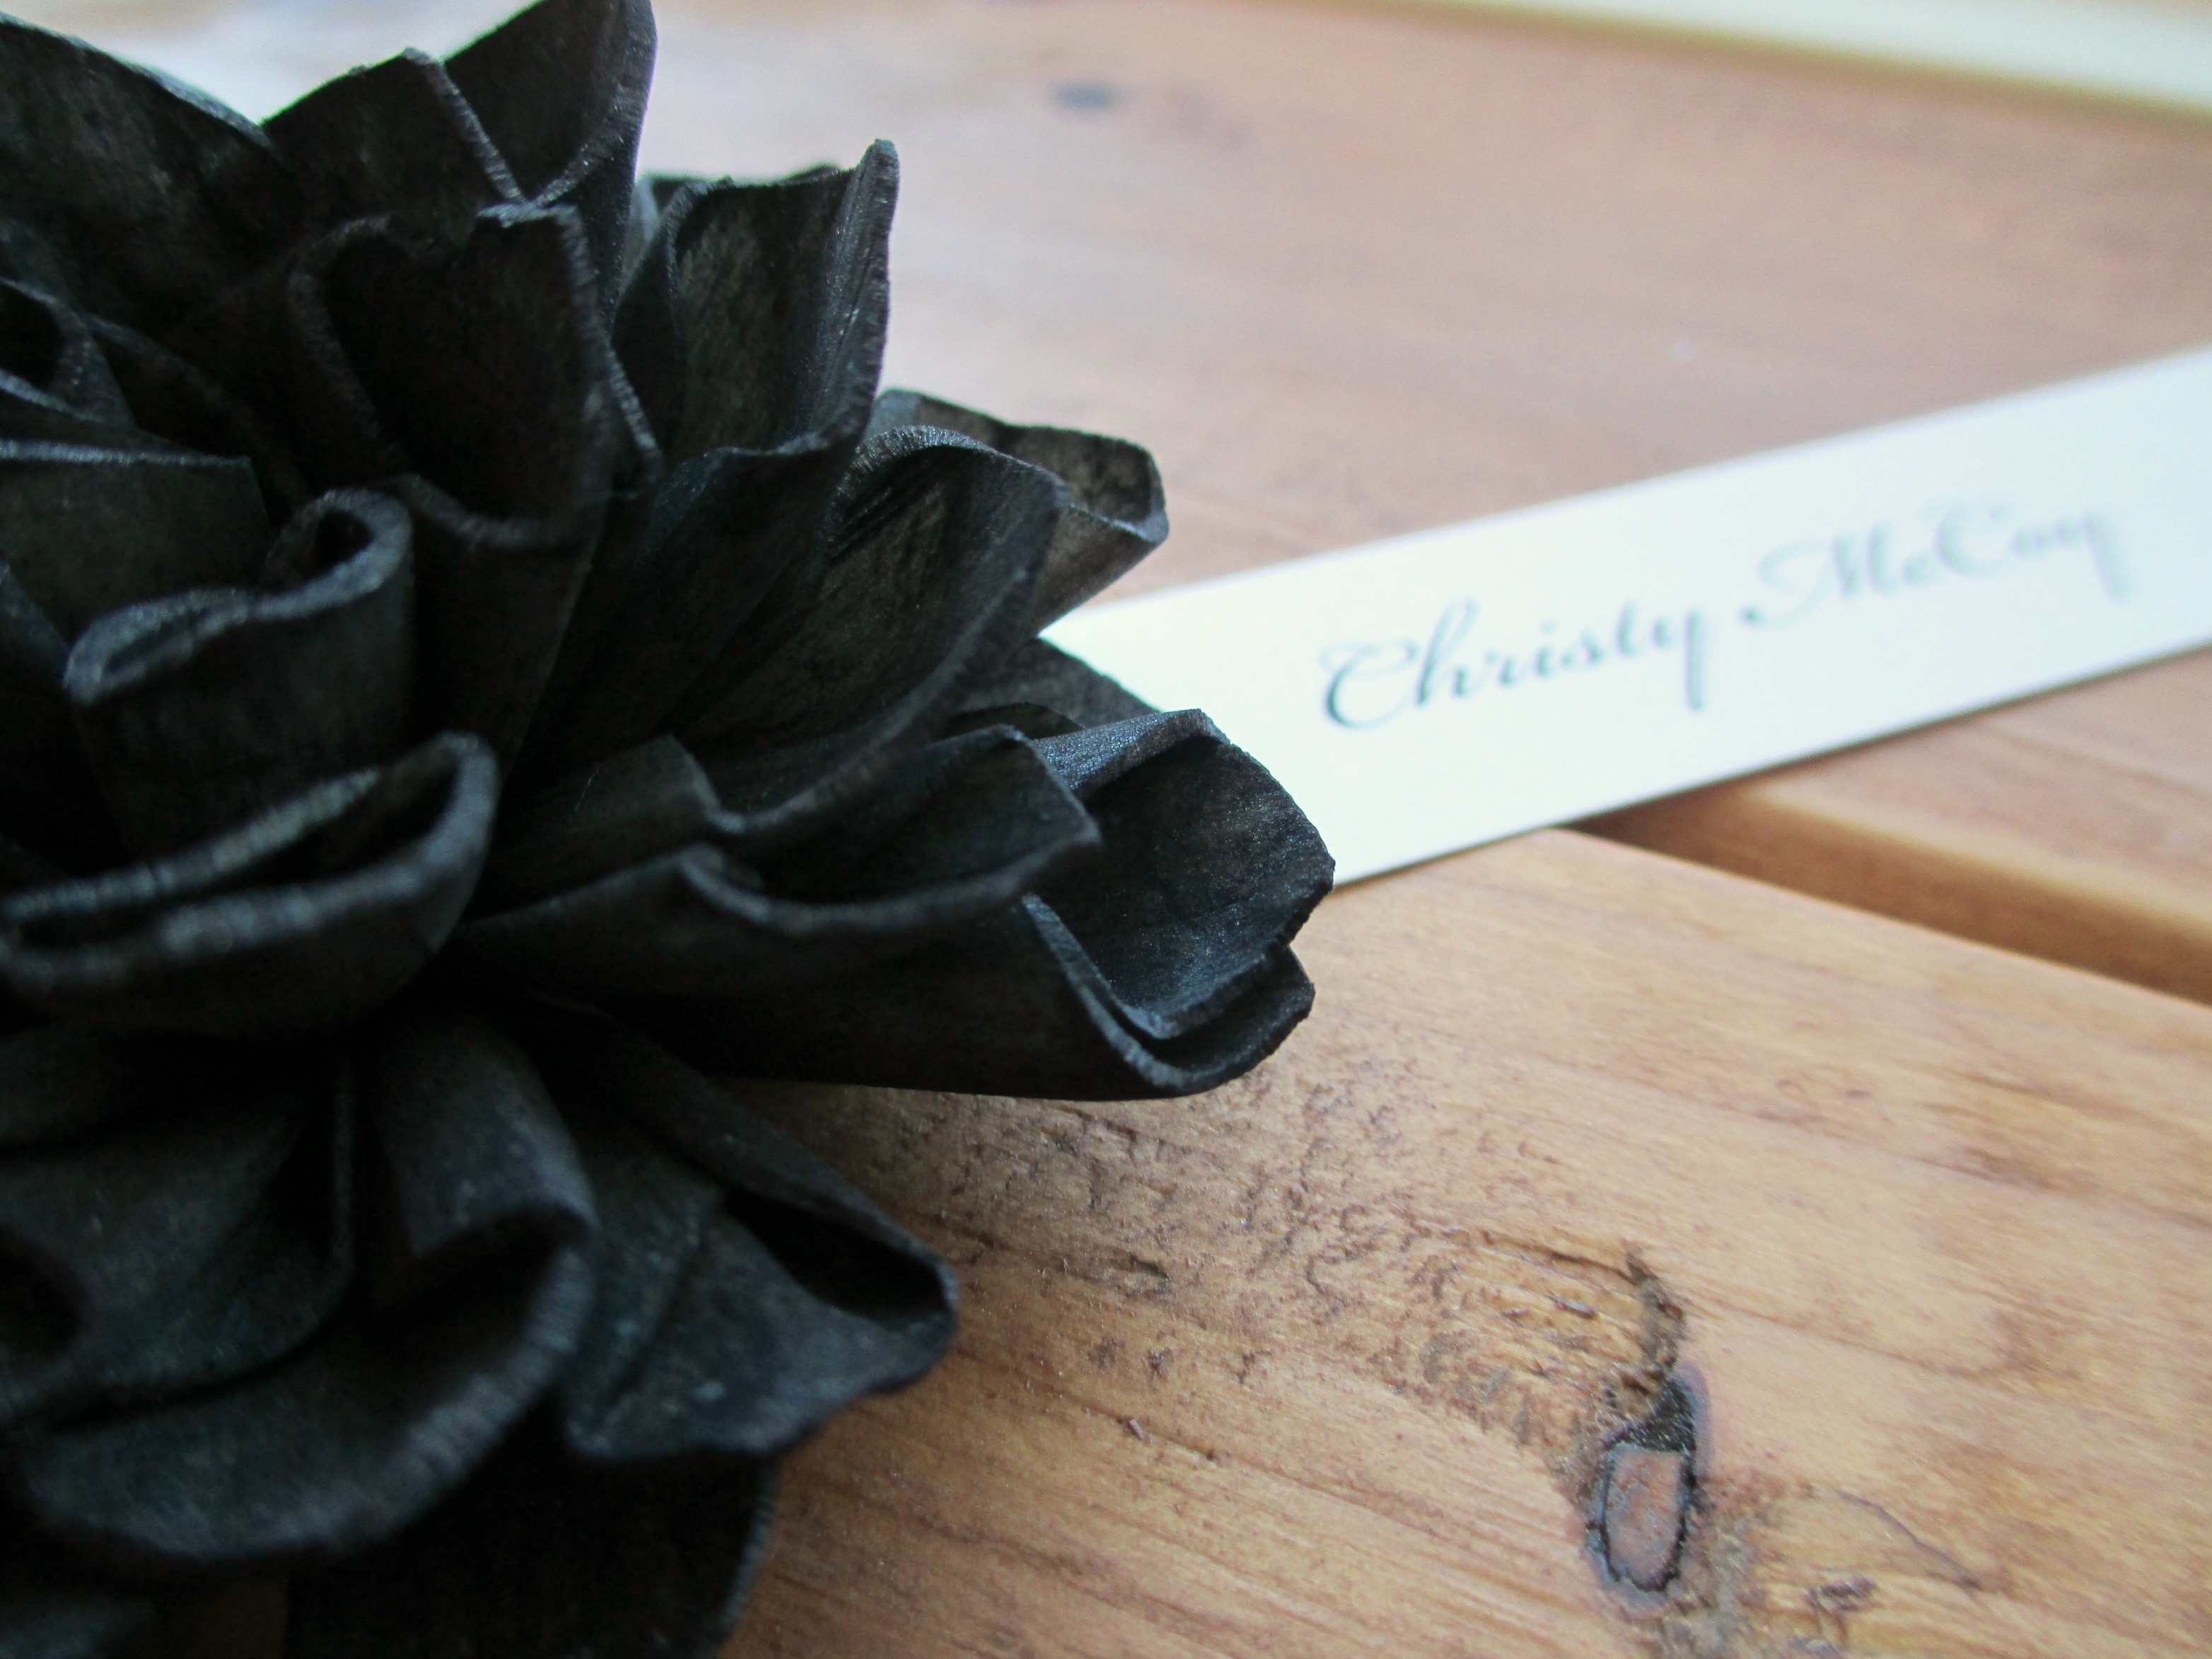 Wooden Rustic Wedding Place Cards